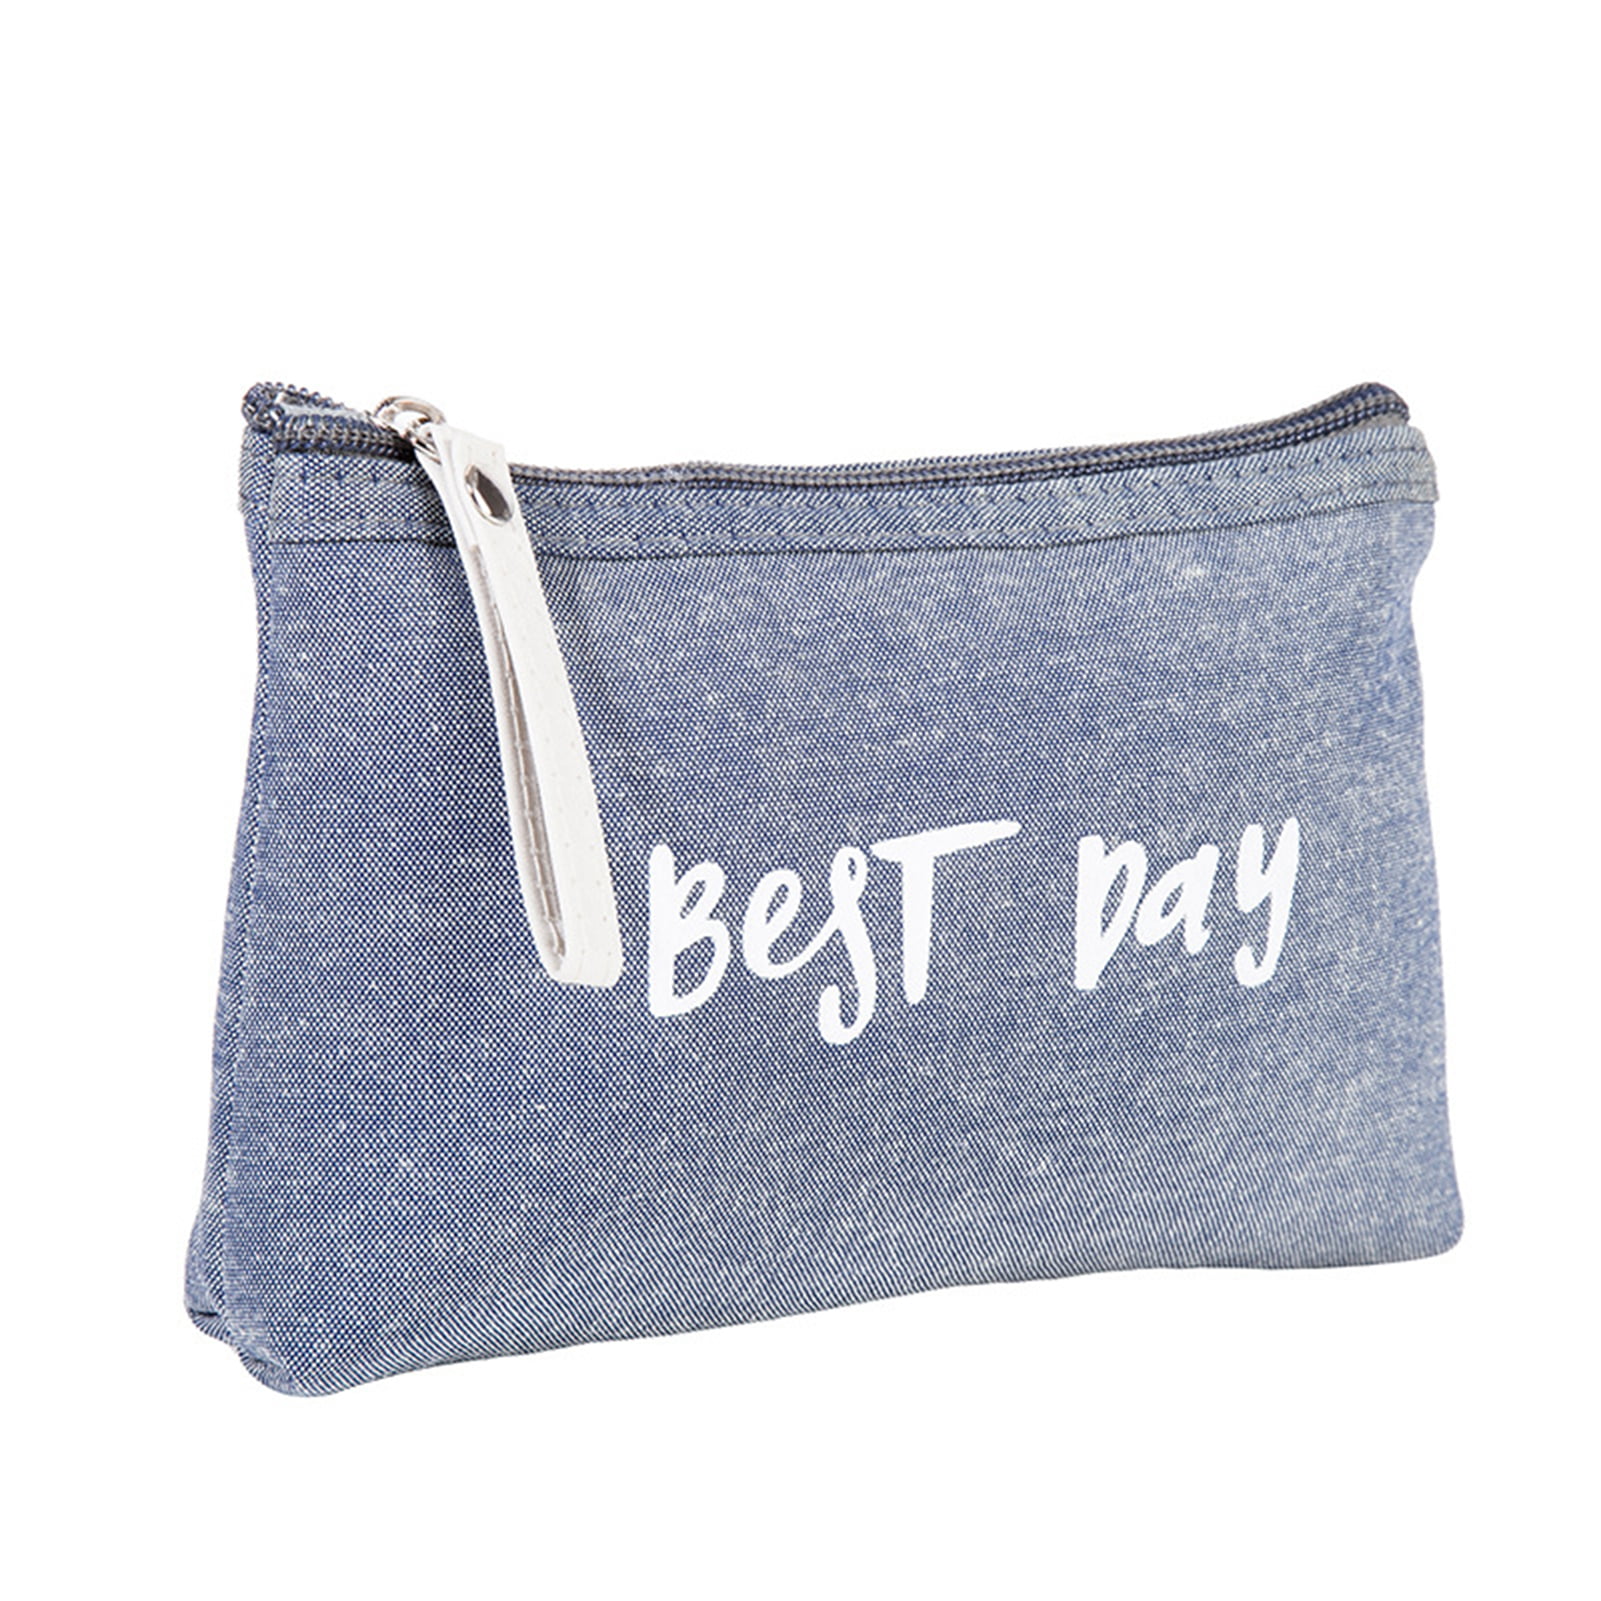  NigelMu Small Makeup Bag for Women,Leather Makeup Pouch,Travel Cosmetic  Bag,Beach Starfish Shell Printing : Beauty & Personal Care